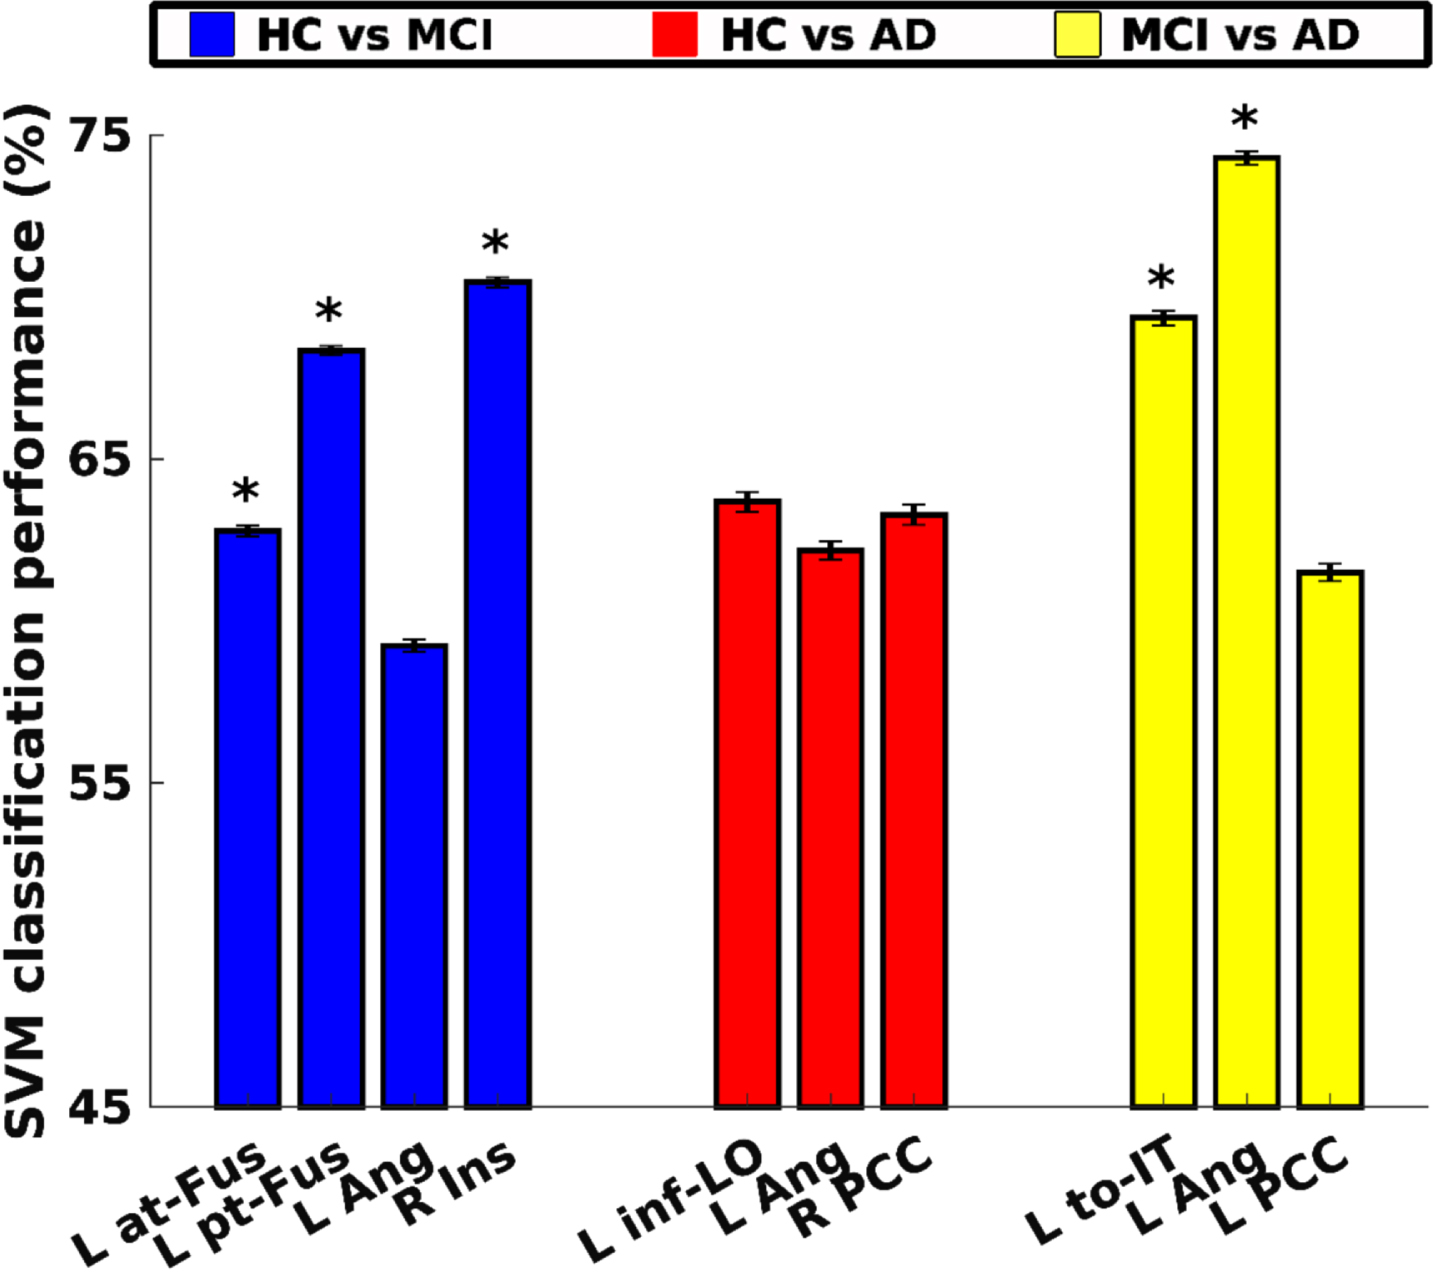 Subject-wise classification. HC versus MCI (blue bars), HC versus mild AD (red bars), and MCI versus mild AD (yellow bars). All regions shown here are significant after 10000 bootstrap resampling of subjects. Regions survived after FDR-correction are marked with an asterisk (*). at-FUS, temporal fusiform cortex, anterior division; pt-FUS, temporal fusiform cortex, posterior division; Ang, angular gyrus; Ins, insular cortex; inf-LO, lateral occipital cortex, inferior division; PCC, cingulate gyrus, posterior division; to-IT, inferior temporal gyrus, temporooccipital part; L, left; R, right.